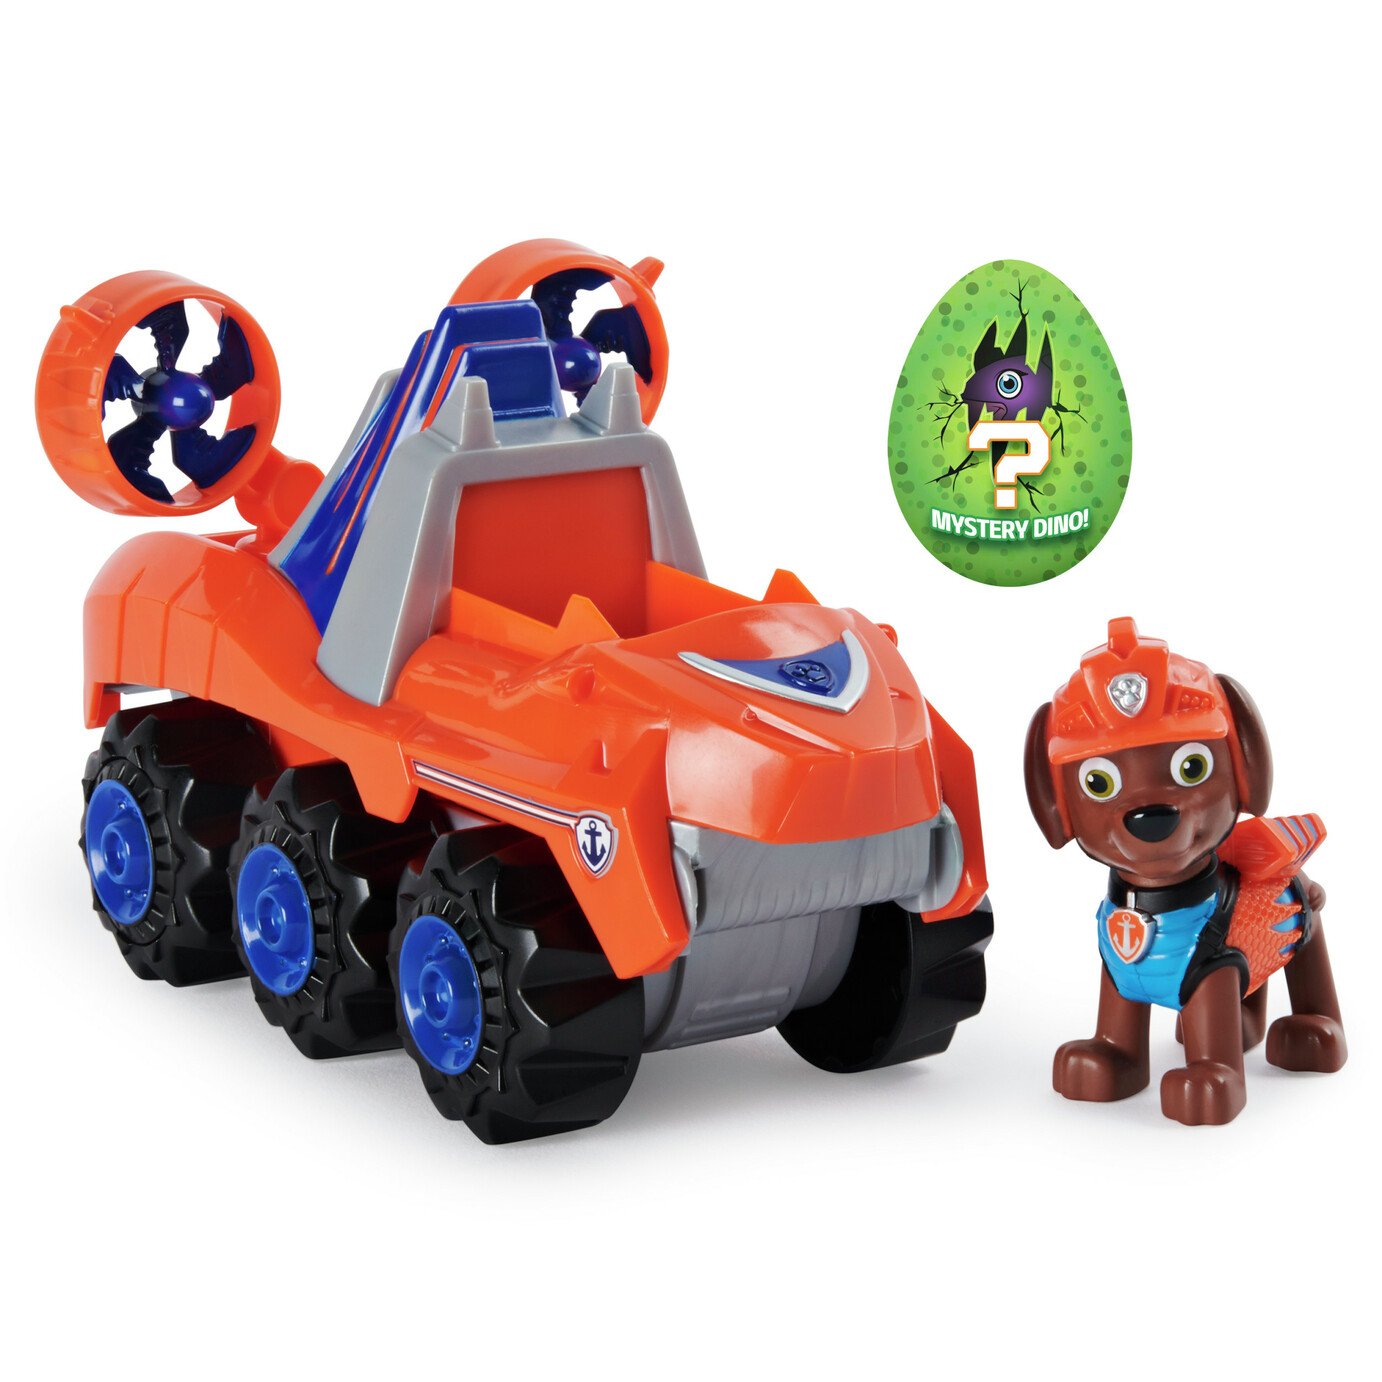 PAW Patrol Dino Rescue Zuma's Deluxe Vehicle Review